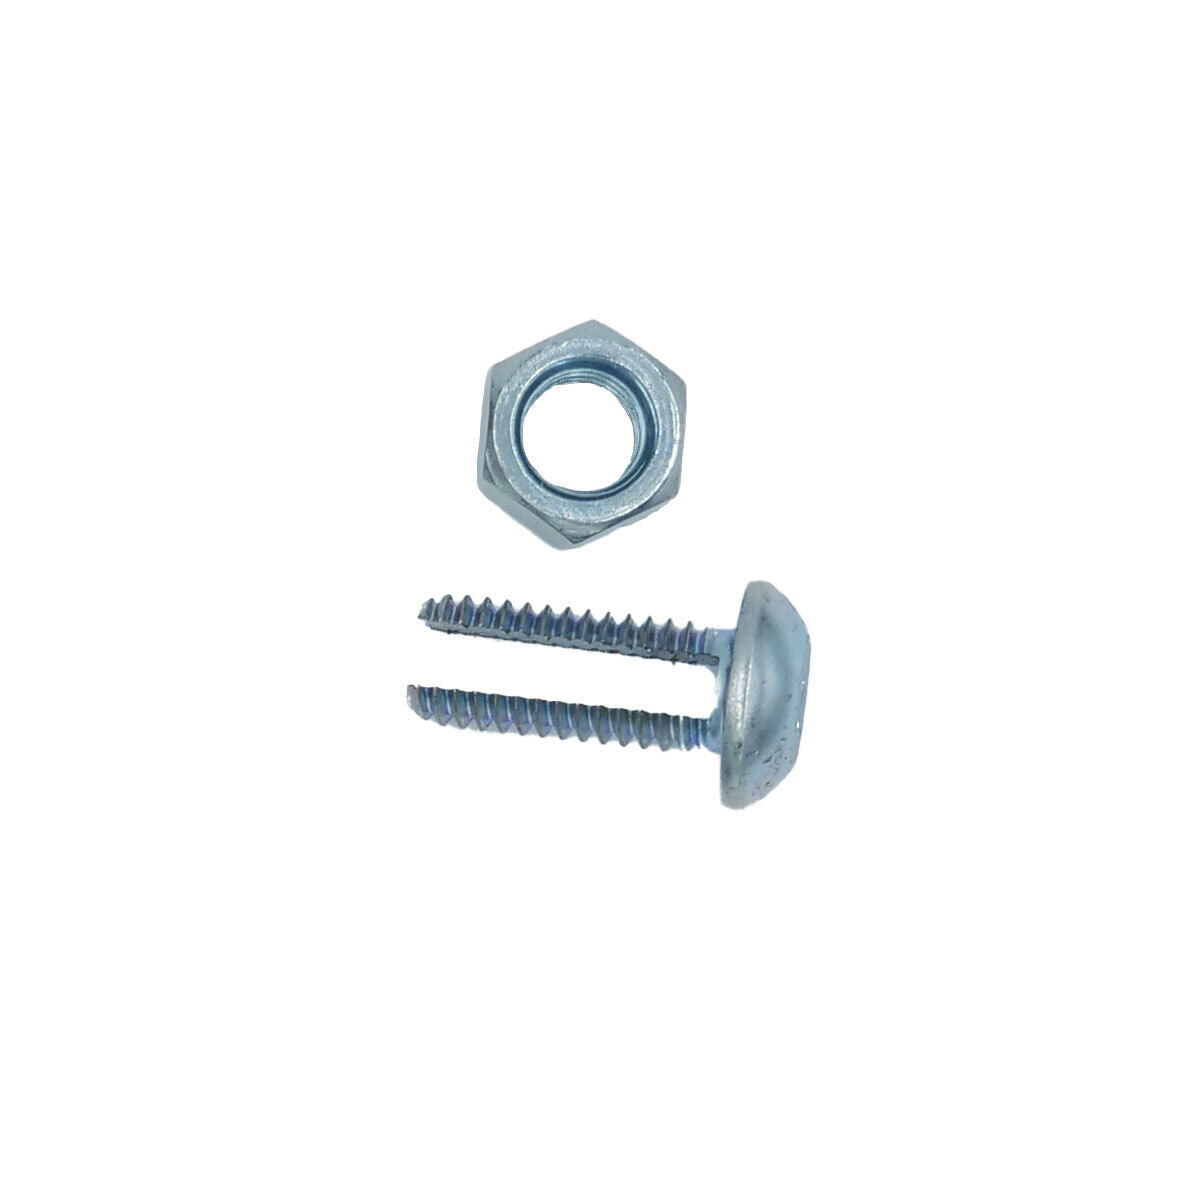 One Man Fencing PM Split Connector Bolt for Livestock Panels and Fencing